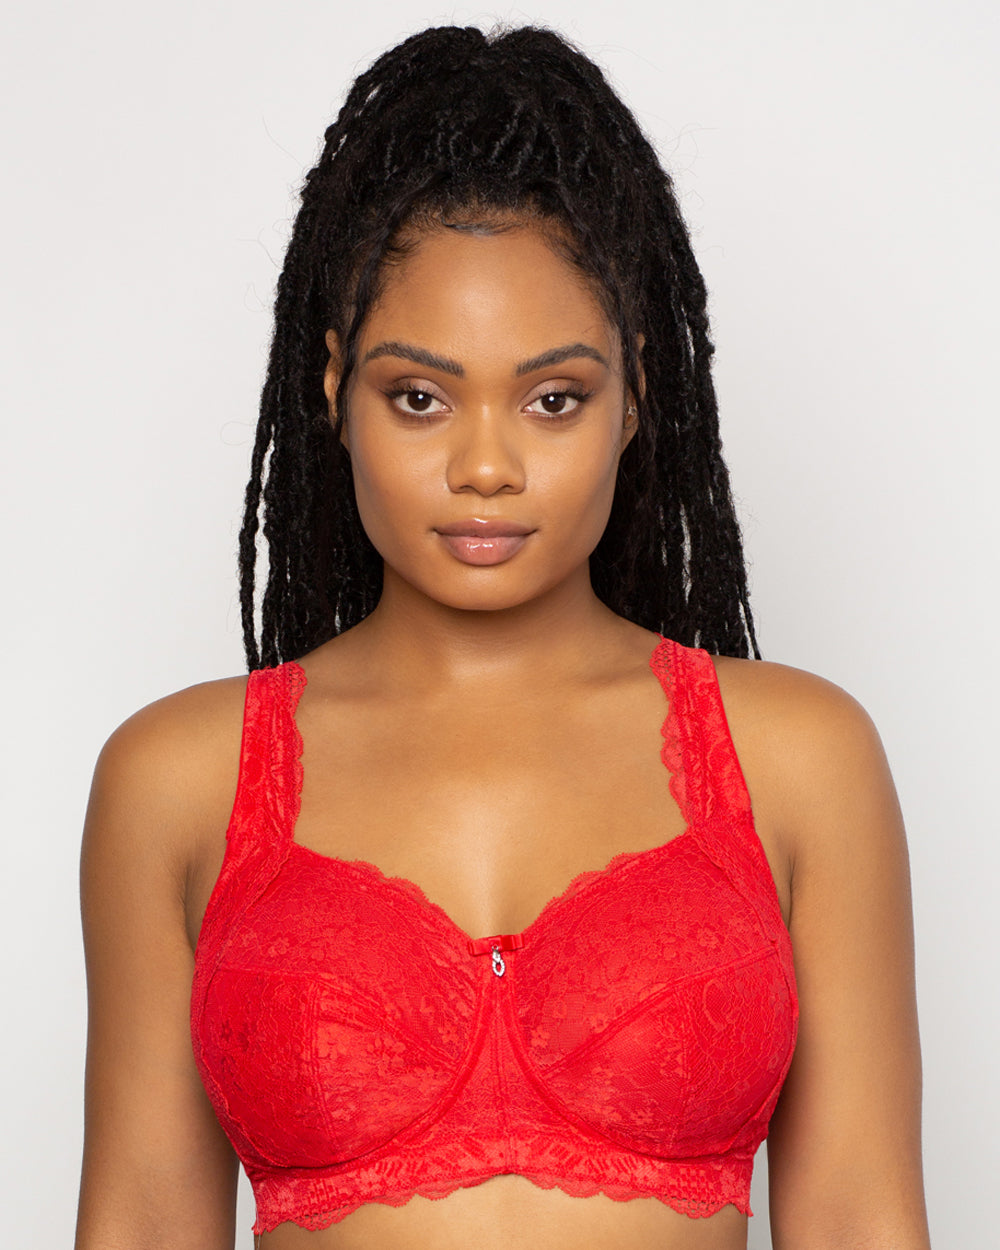 Wireless Bra (Relax) (Plunging Lace)